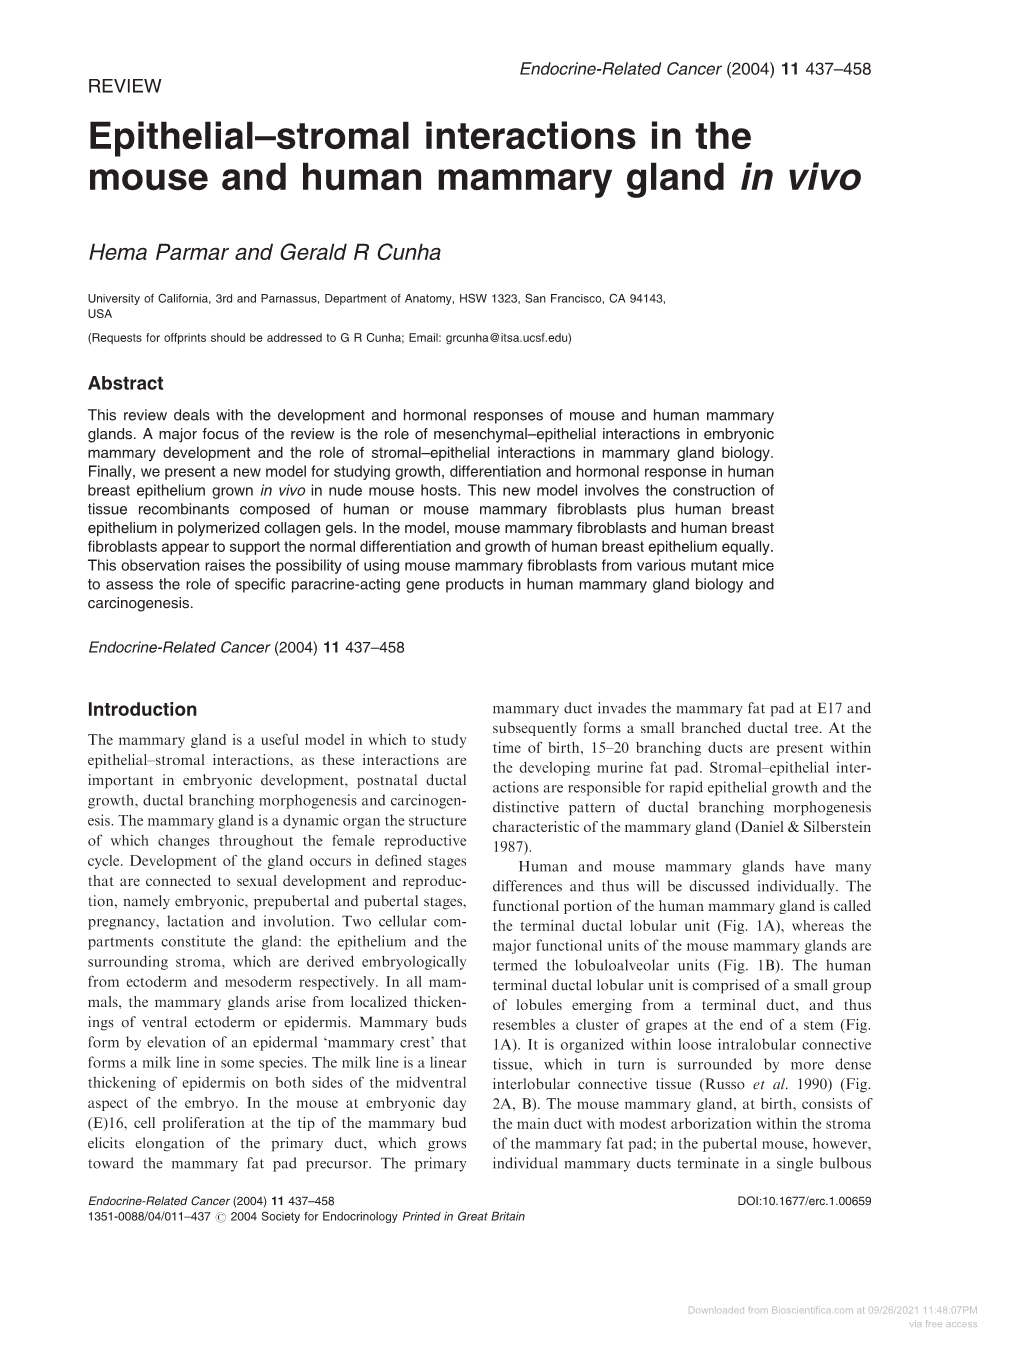 Epithelial–Stromal Interactions in the Mouse and Human Mammary Gland in Vivo